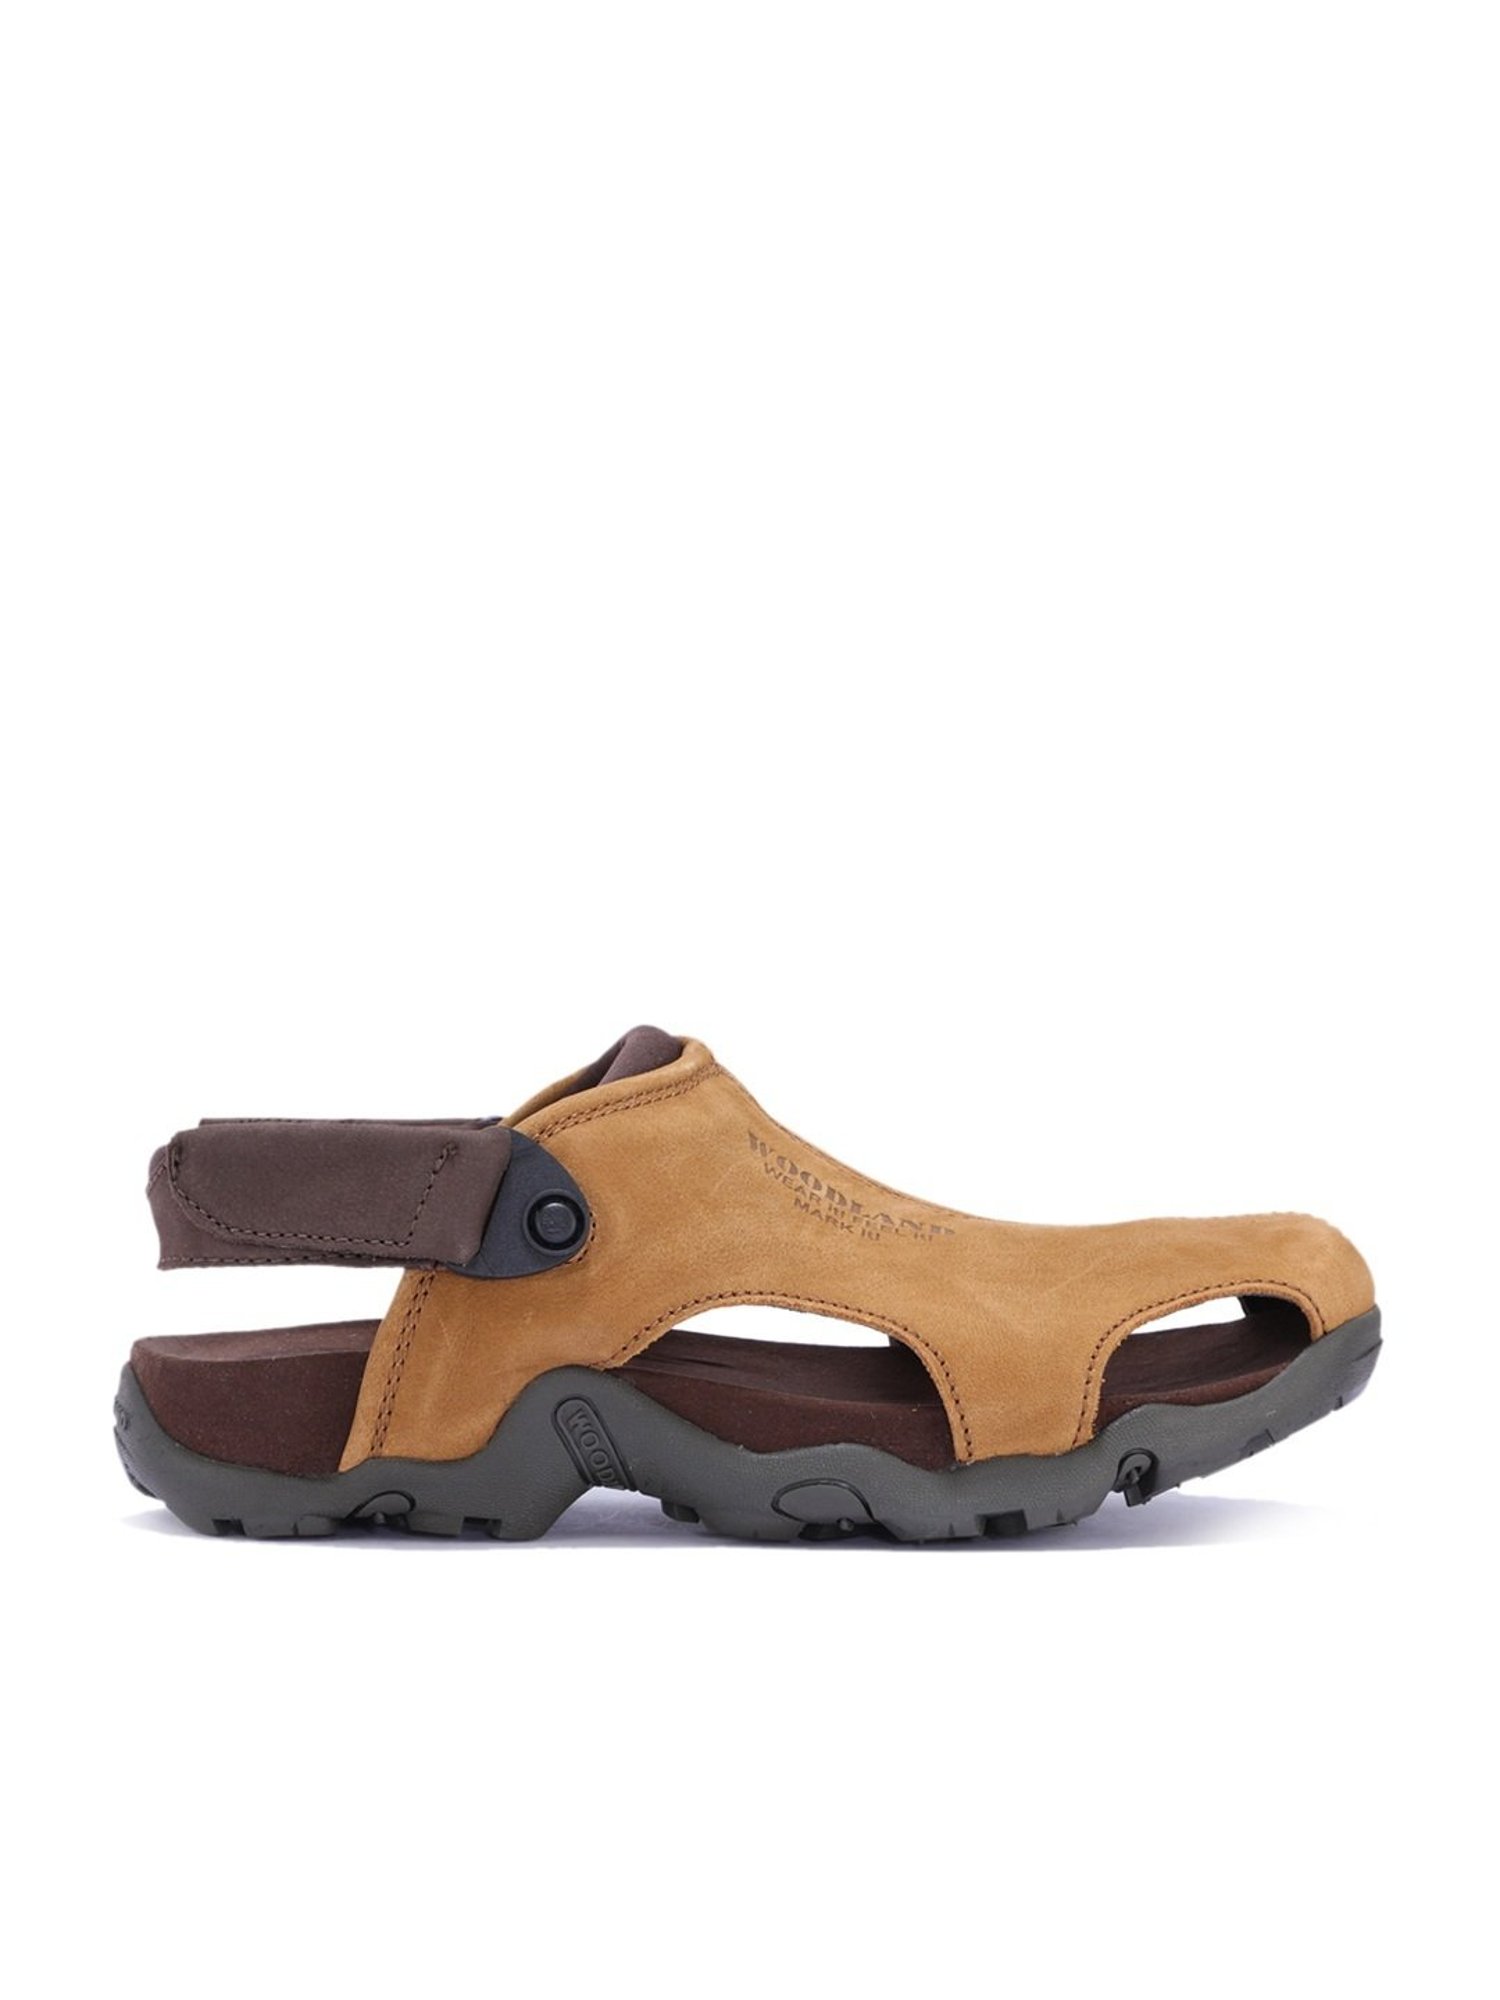 Buy Woodland Camel Thong Sandals for Men at Best Price @ Tata CLiQ